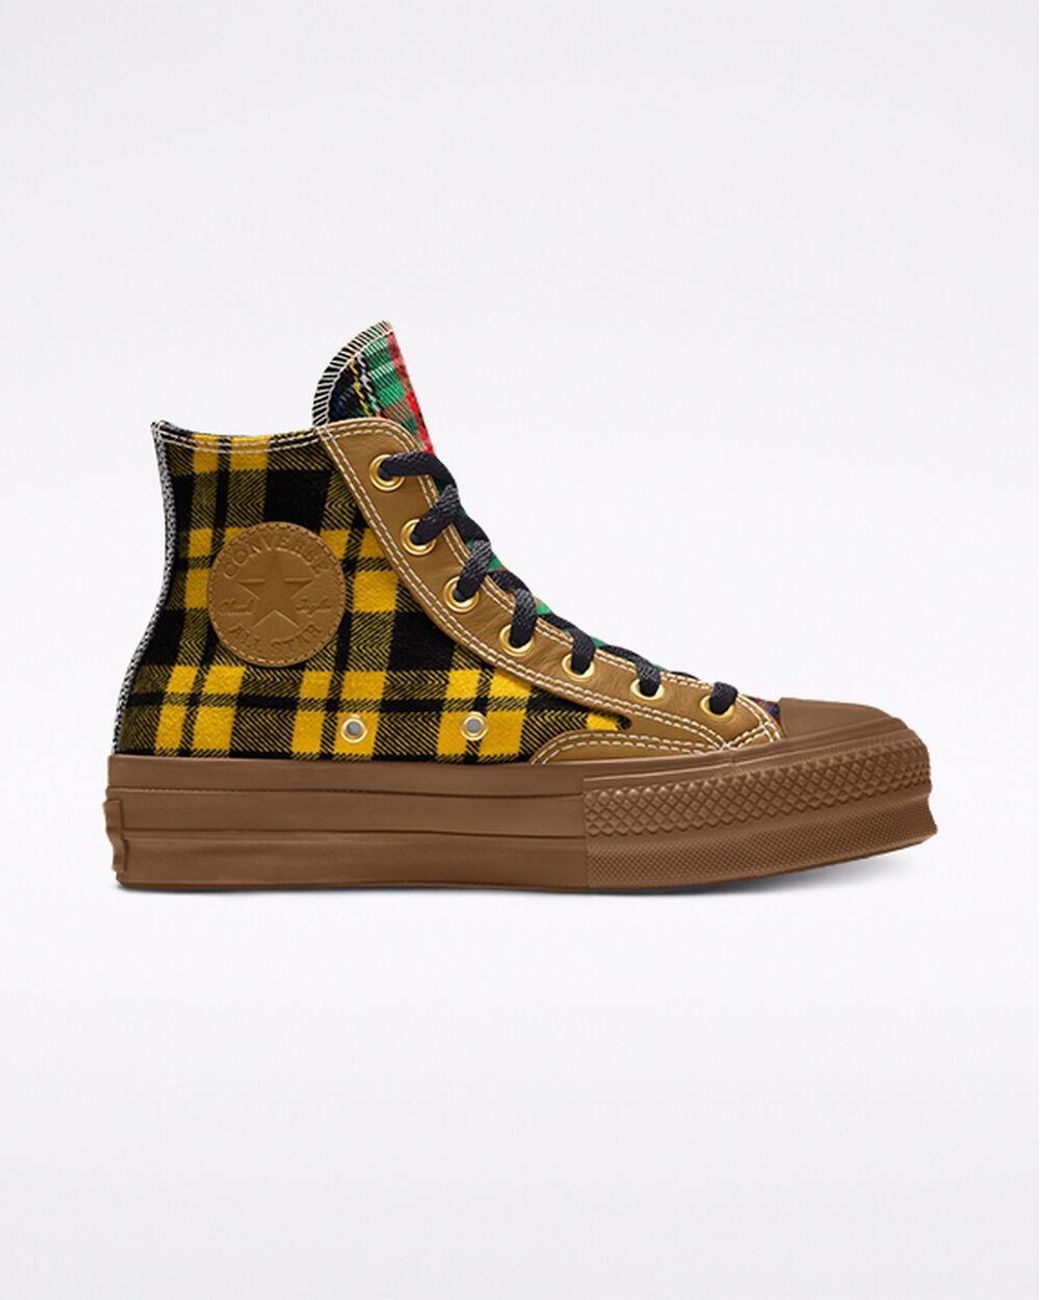 Arriba 69+ imagen brown and plaid converse